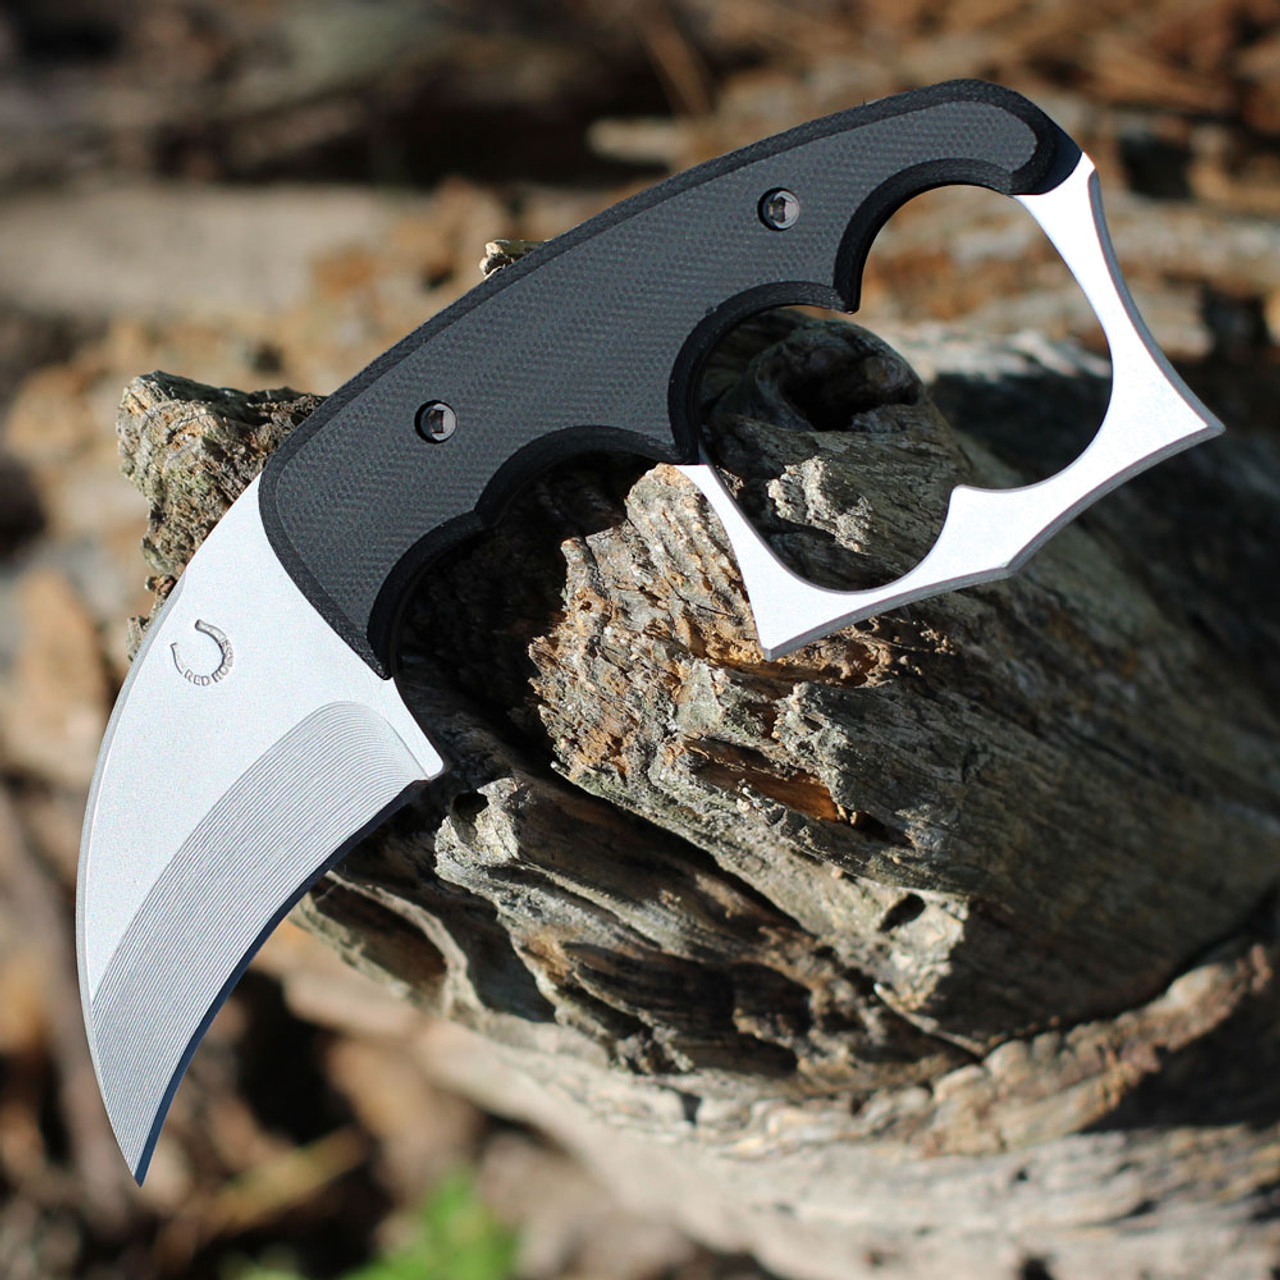 product image for Red-Horse-Knife-Works Black Malice Karambit Fixed Blade RH-019